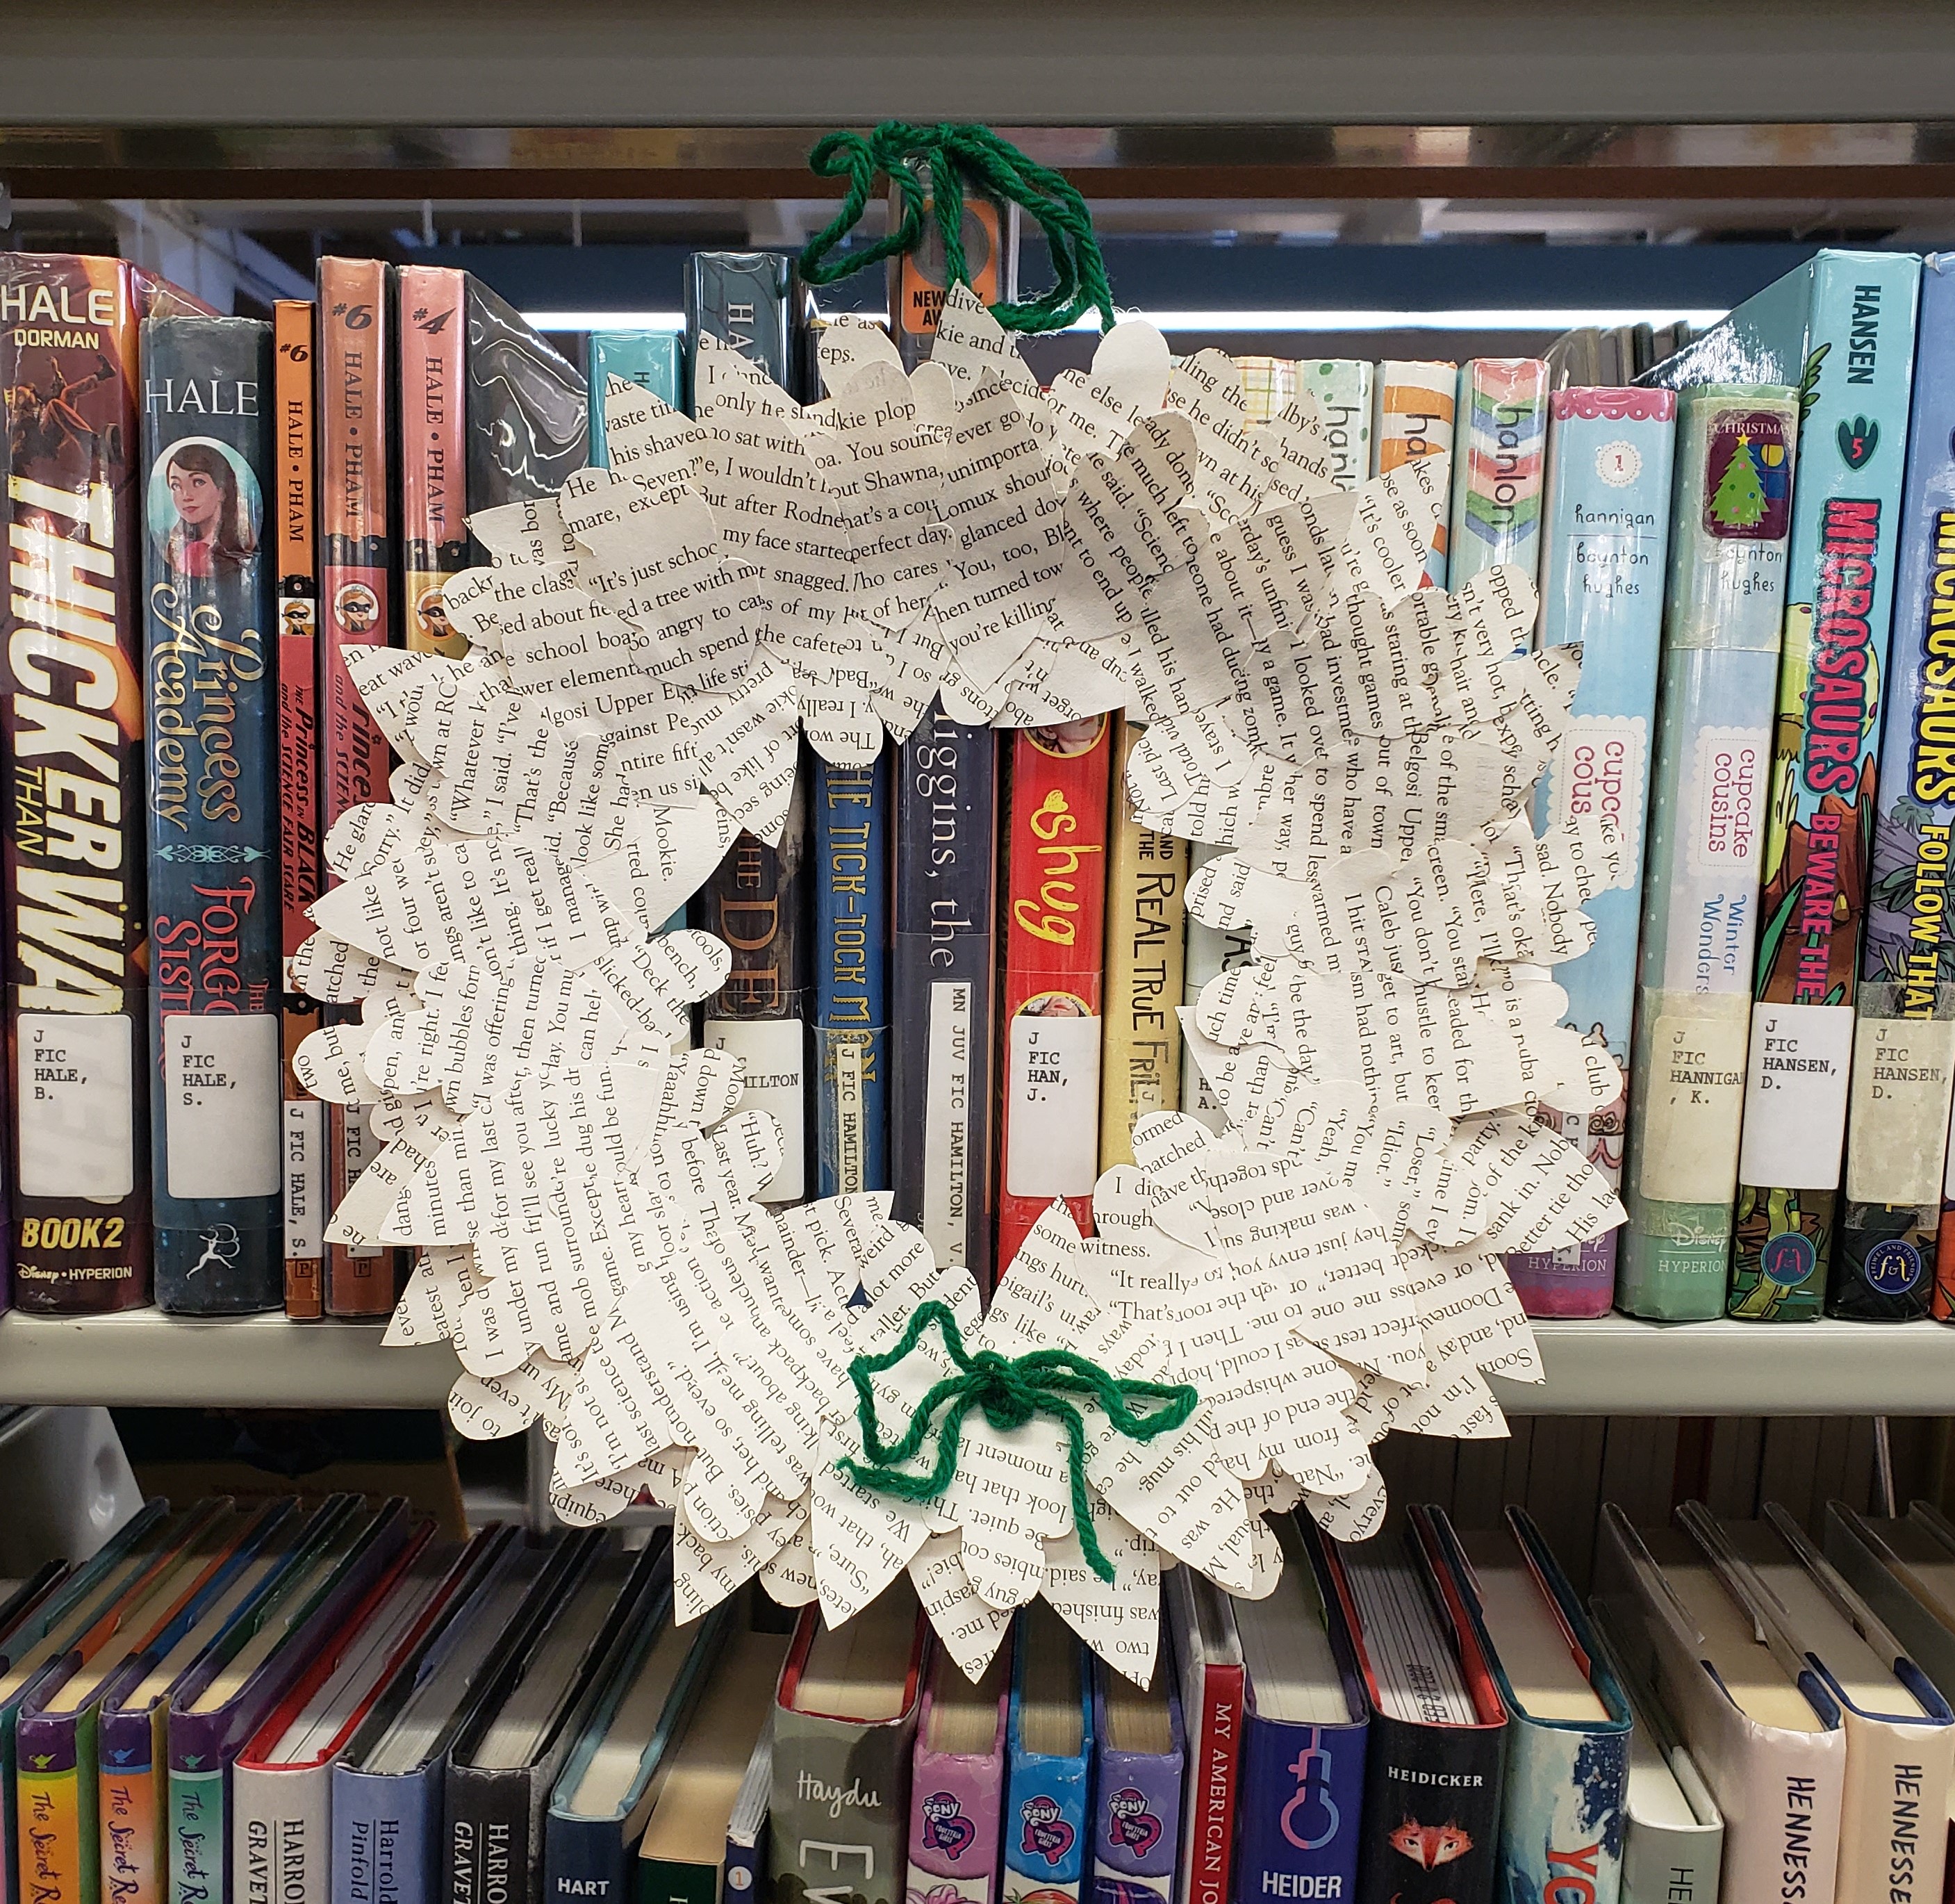 Wreath with leaves made from old book pages hanging off bookshelf